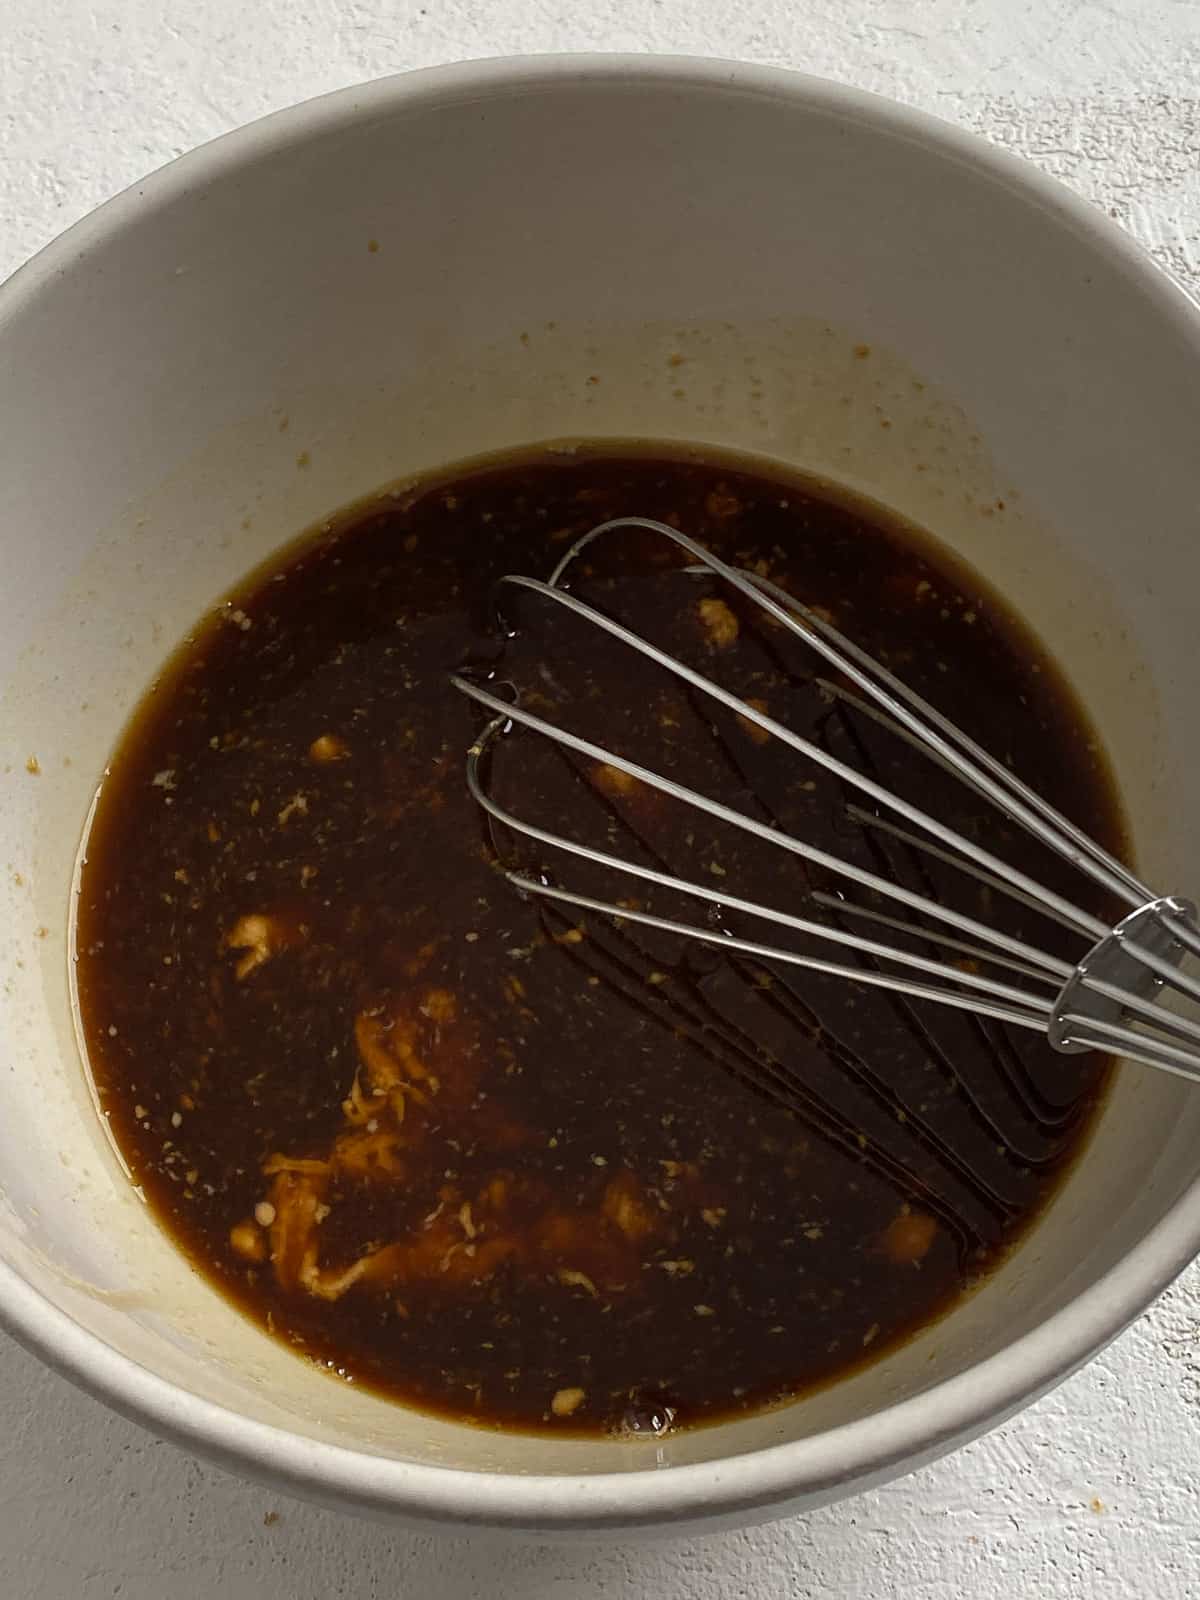 process shot of mixing sauce ingredients together in a bowl